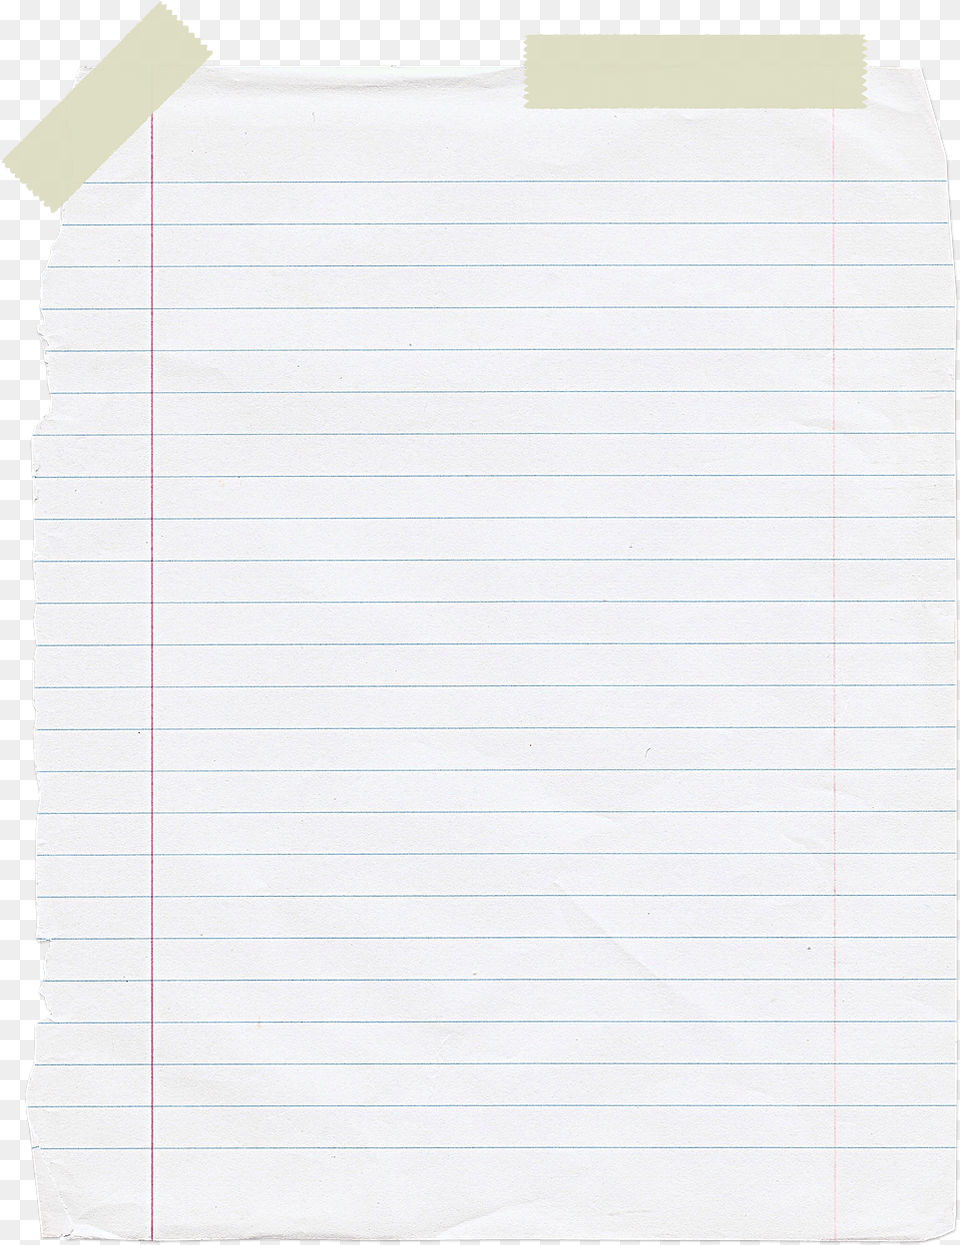 Paper Feint Lines Adhesive Photo On Pixabay Notebook Paper Taped, Page, Text, Adult, Bride Free Png